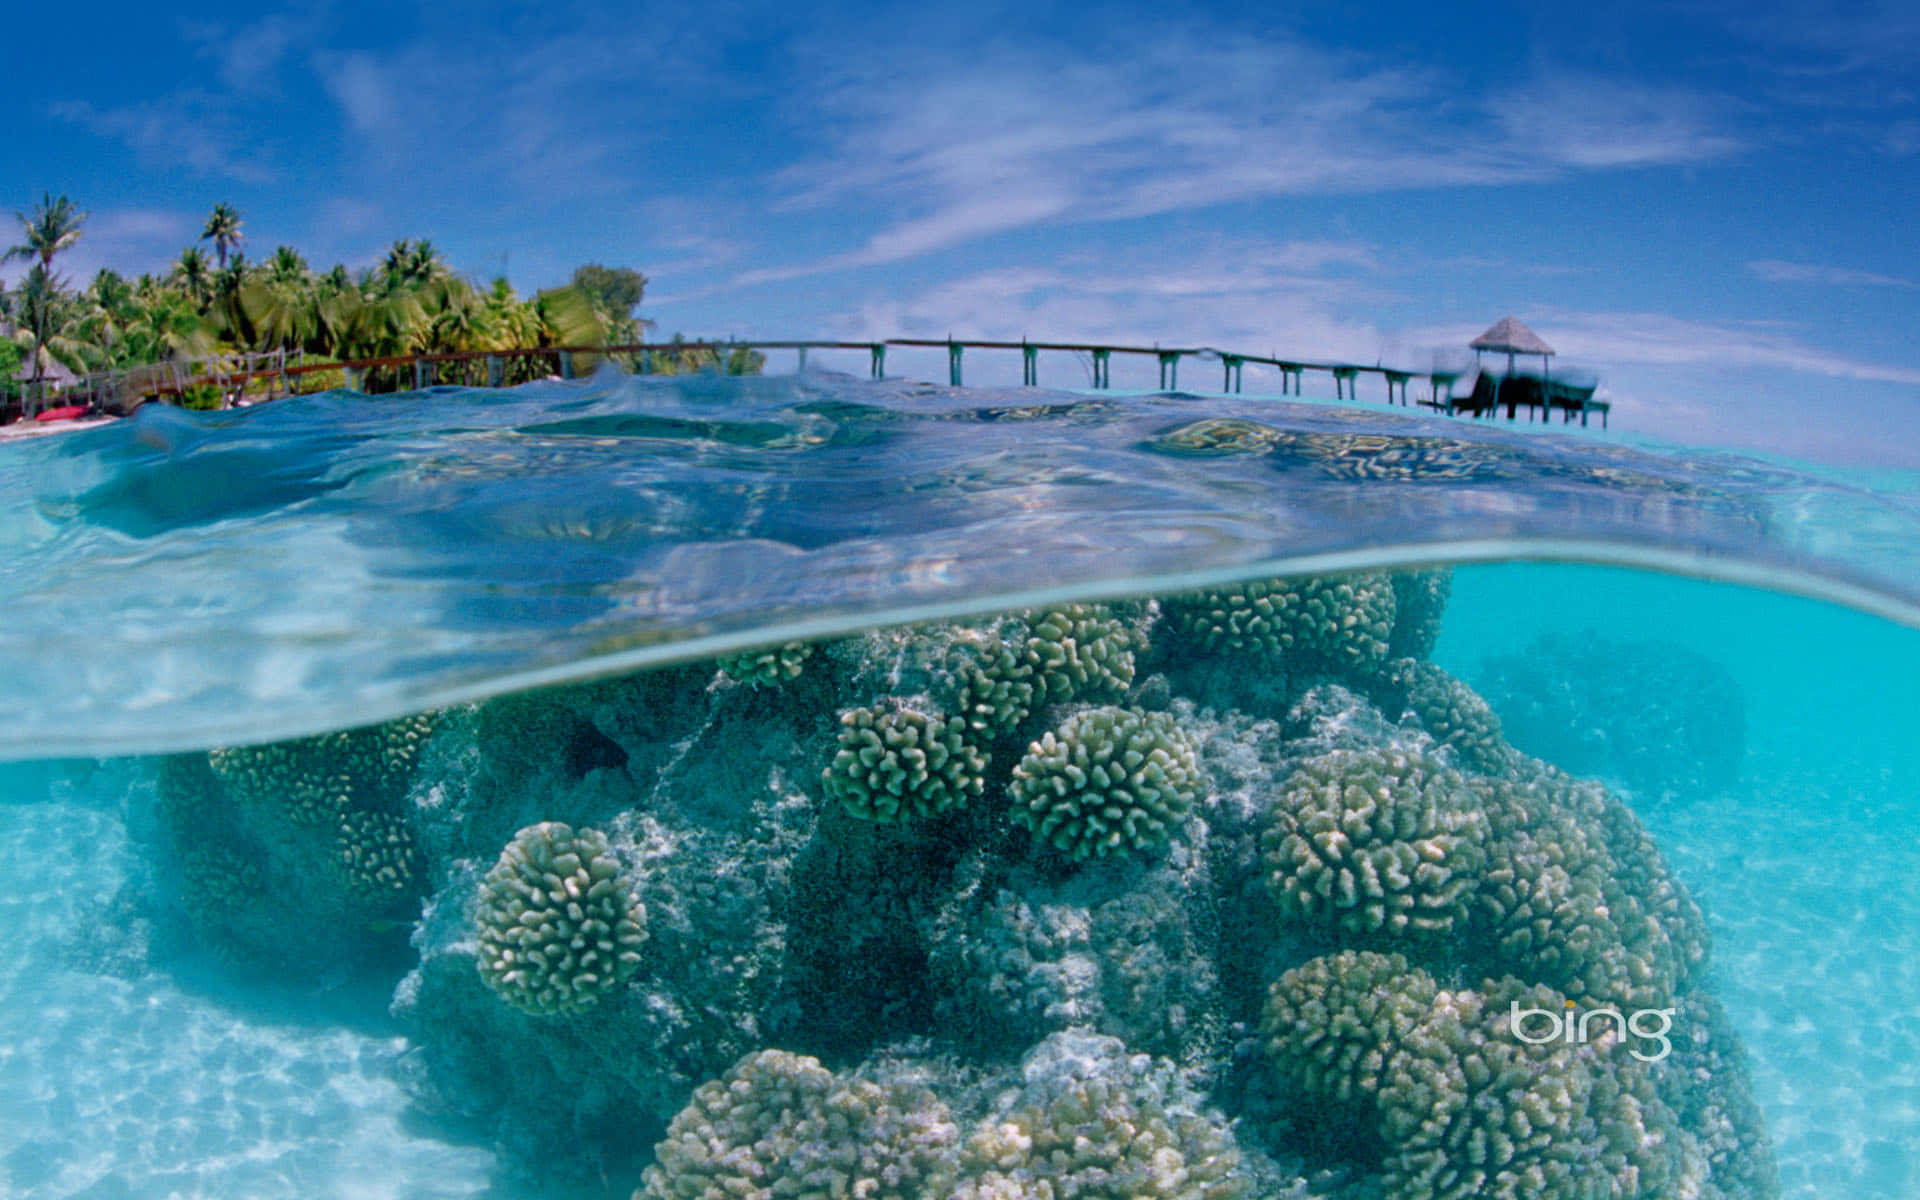 A Pier And Coral Reefs In The Ocean